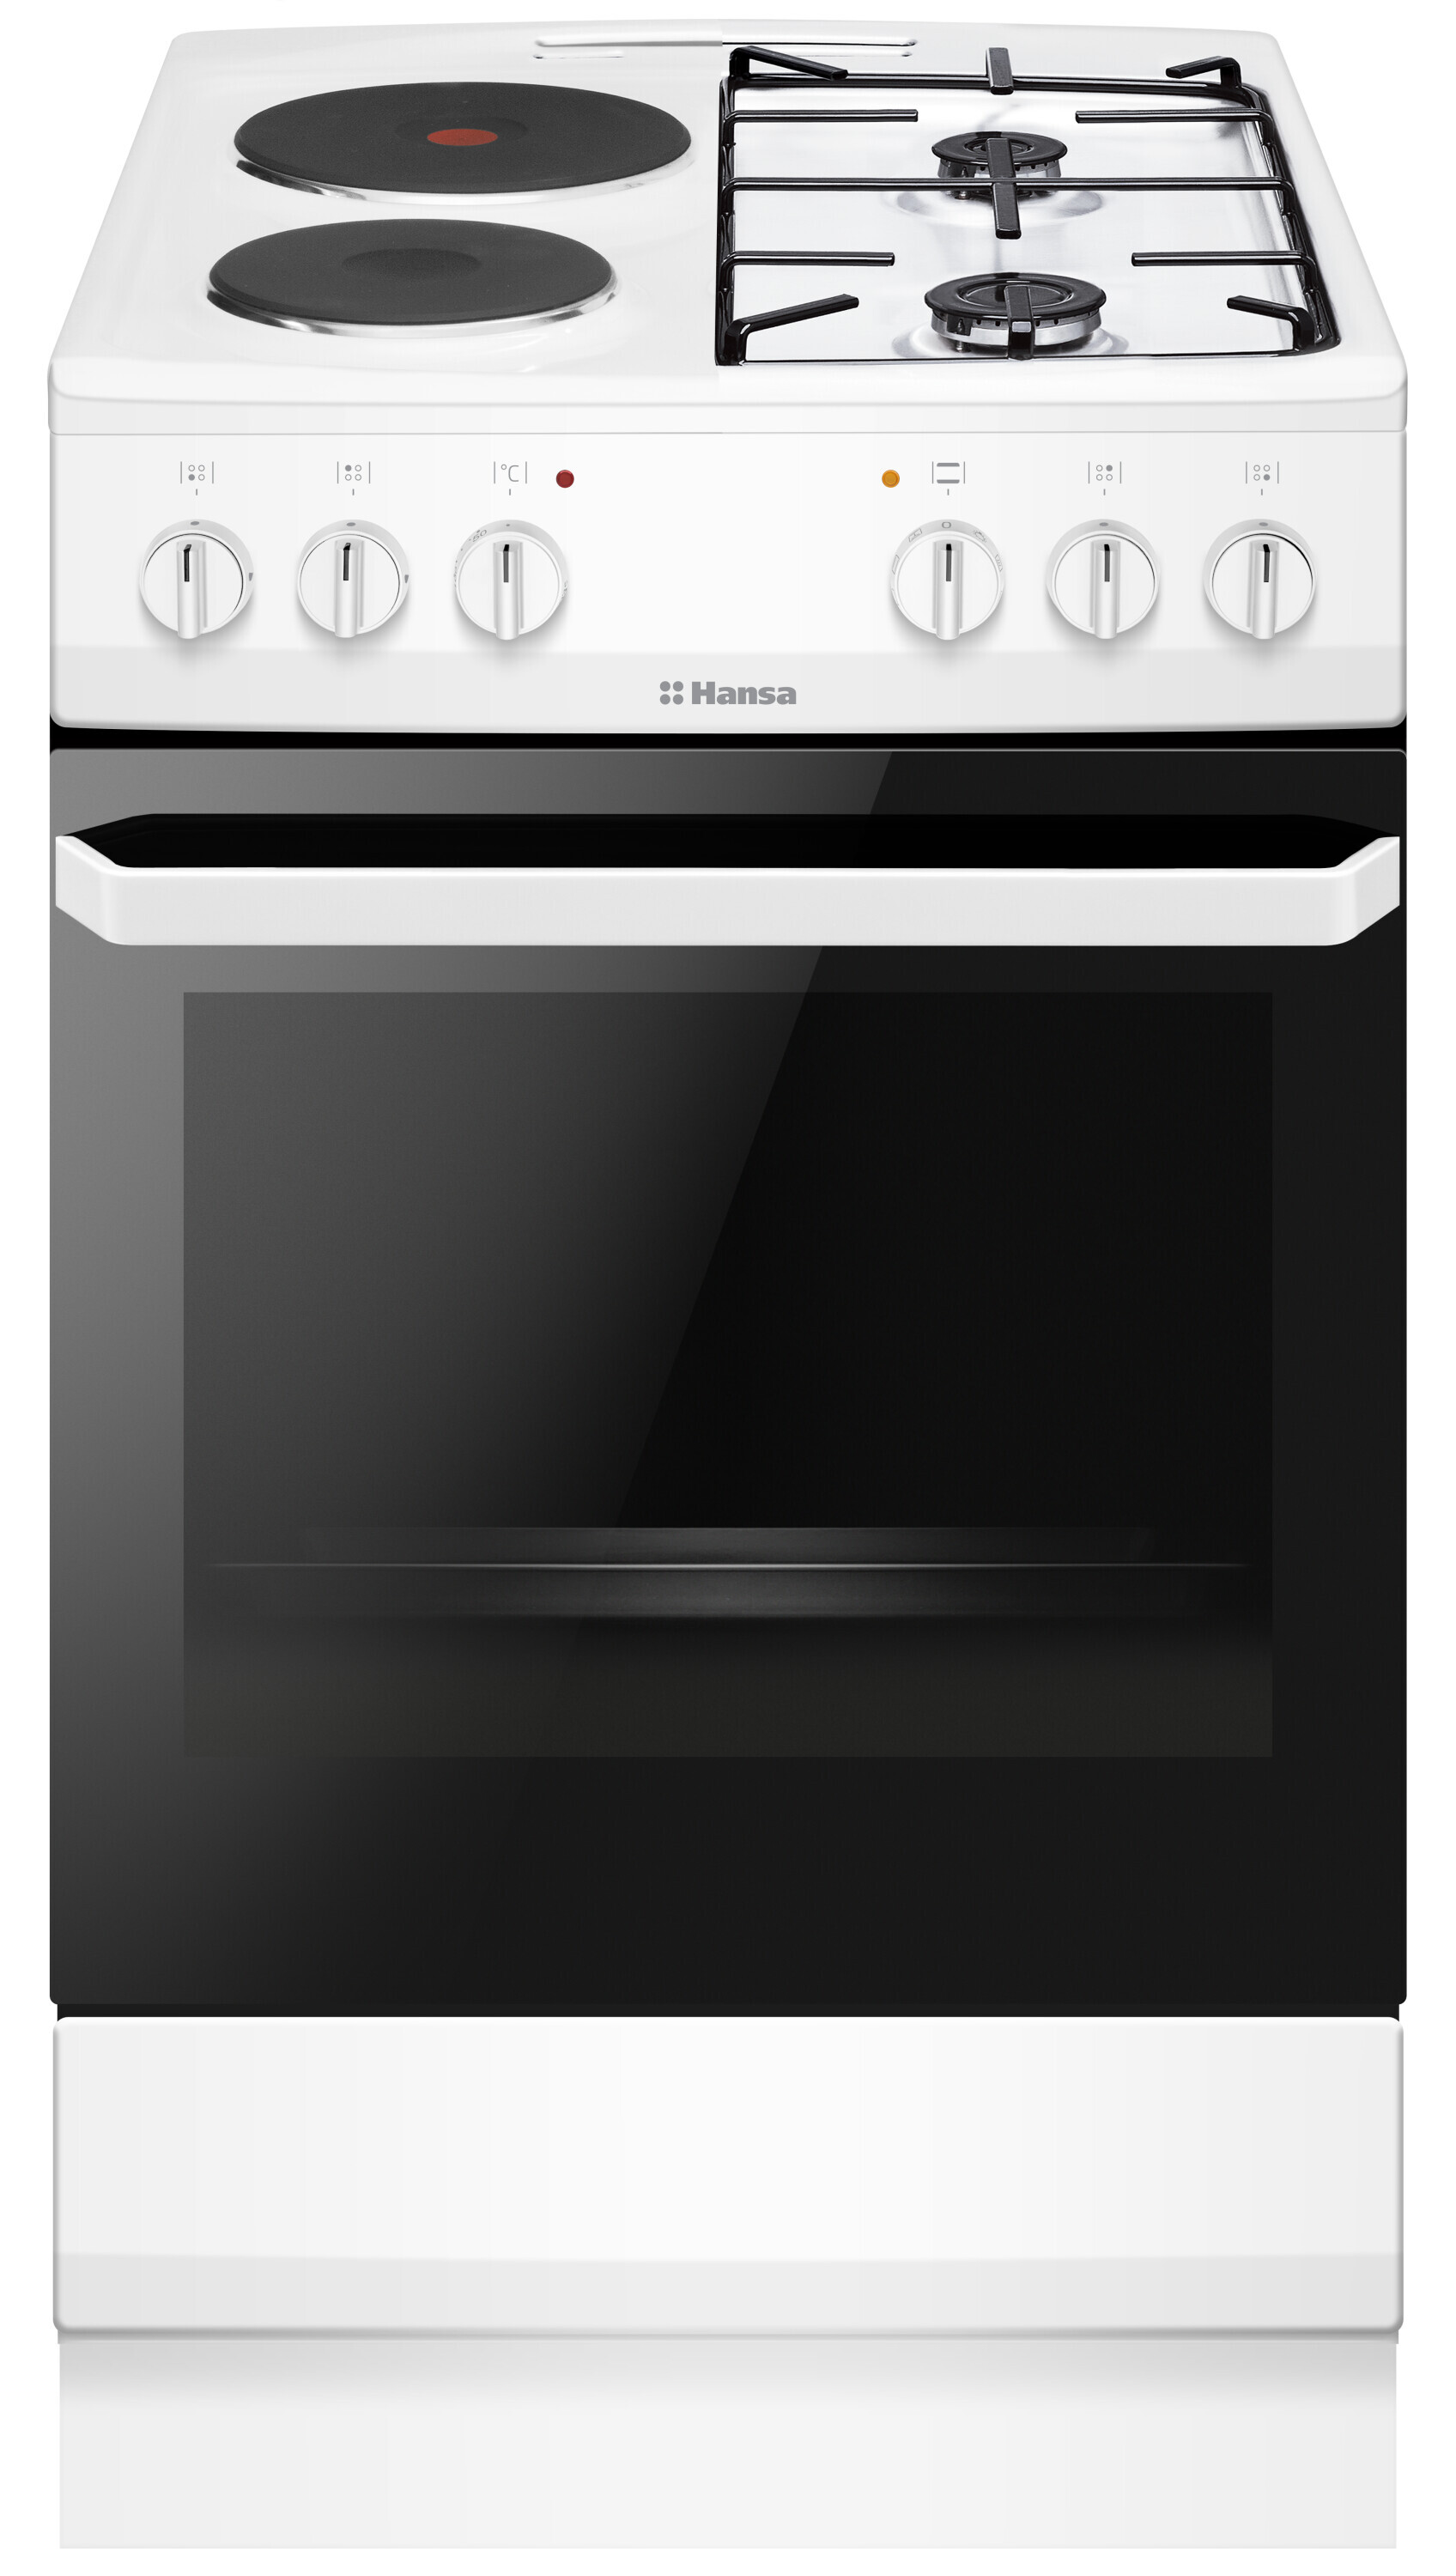 Freestanding cooker with mix hob